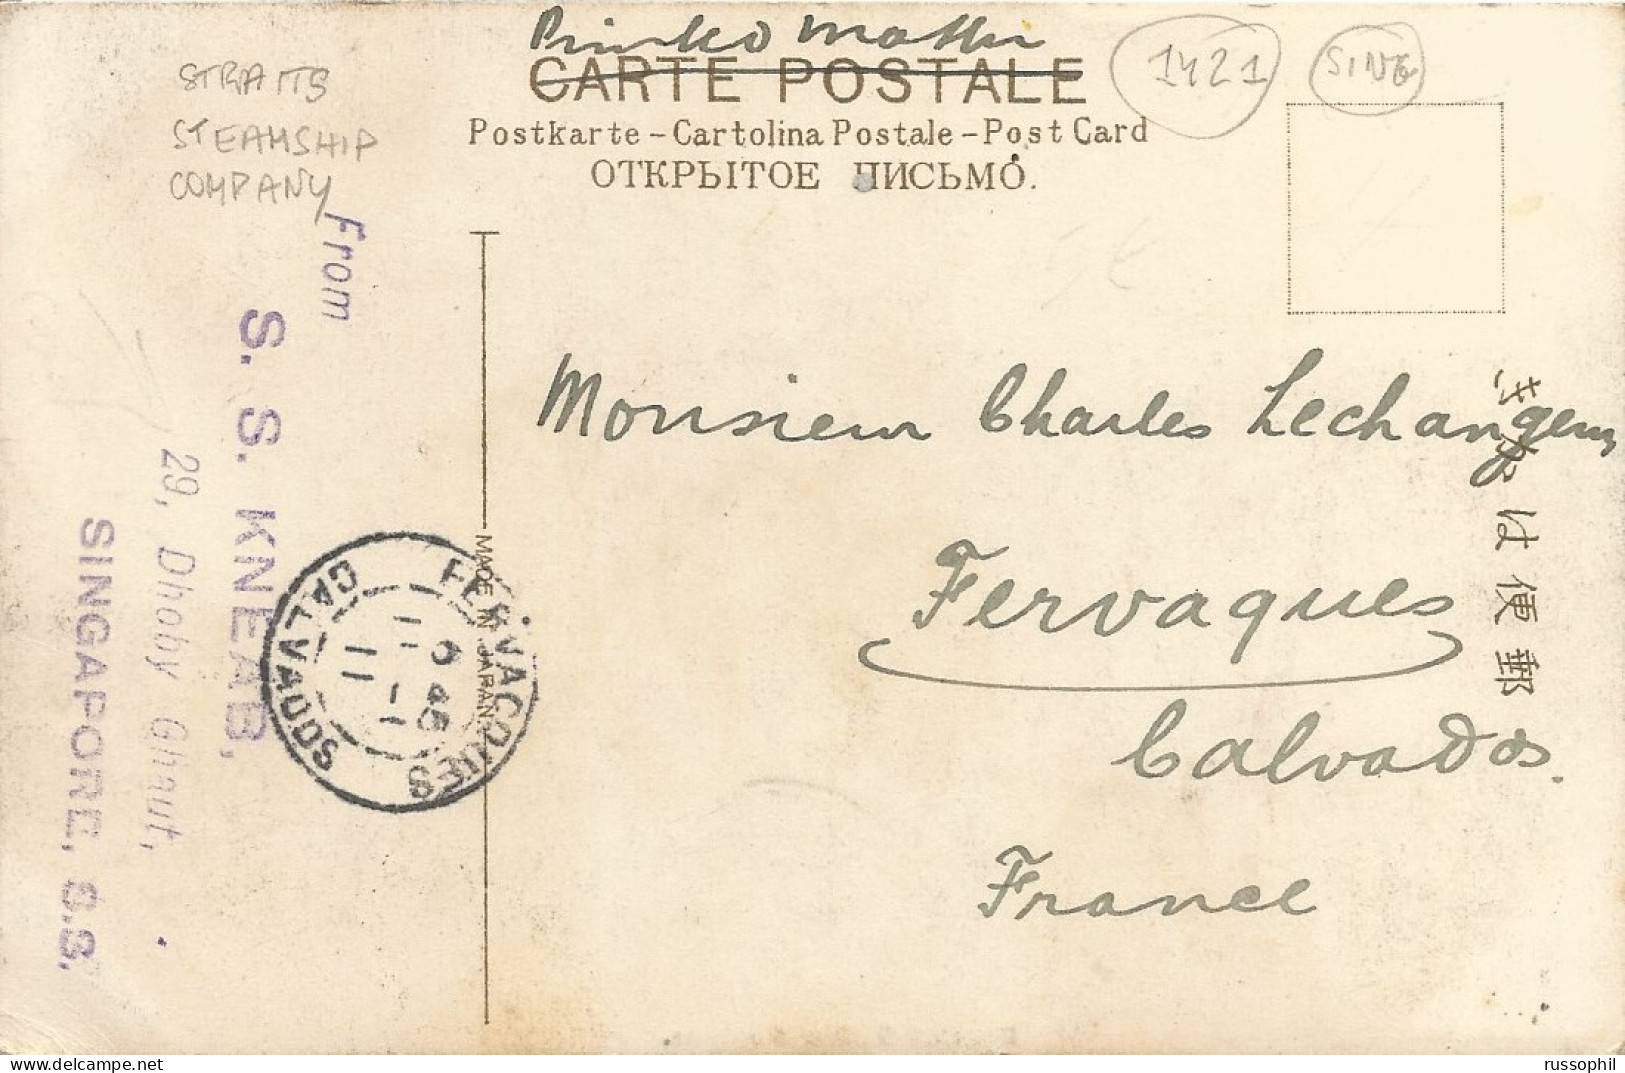 STRAITS SETTLEMENTS - "W.M & CO" PERFIN STAMP ON FRANKED PC SENT FROM SRAITS STEAMSHIP CO "S.S. KNEAB" TO FRANCE - 1910 - Singapur (...-1959)